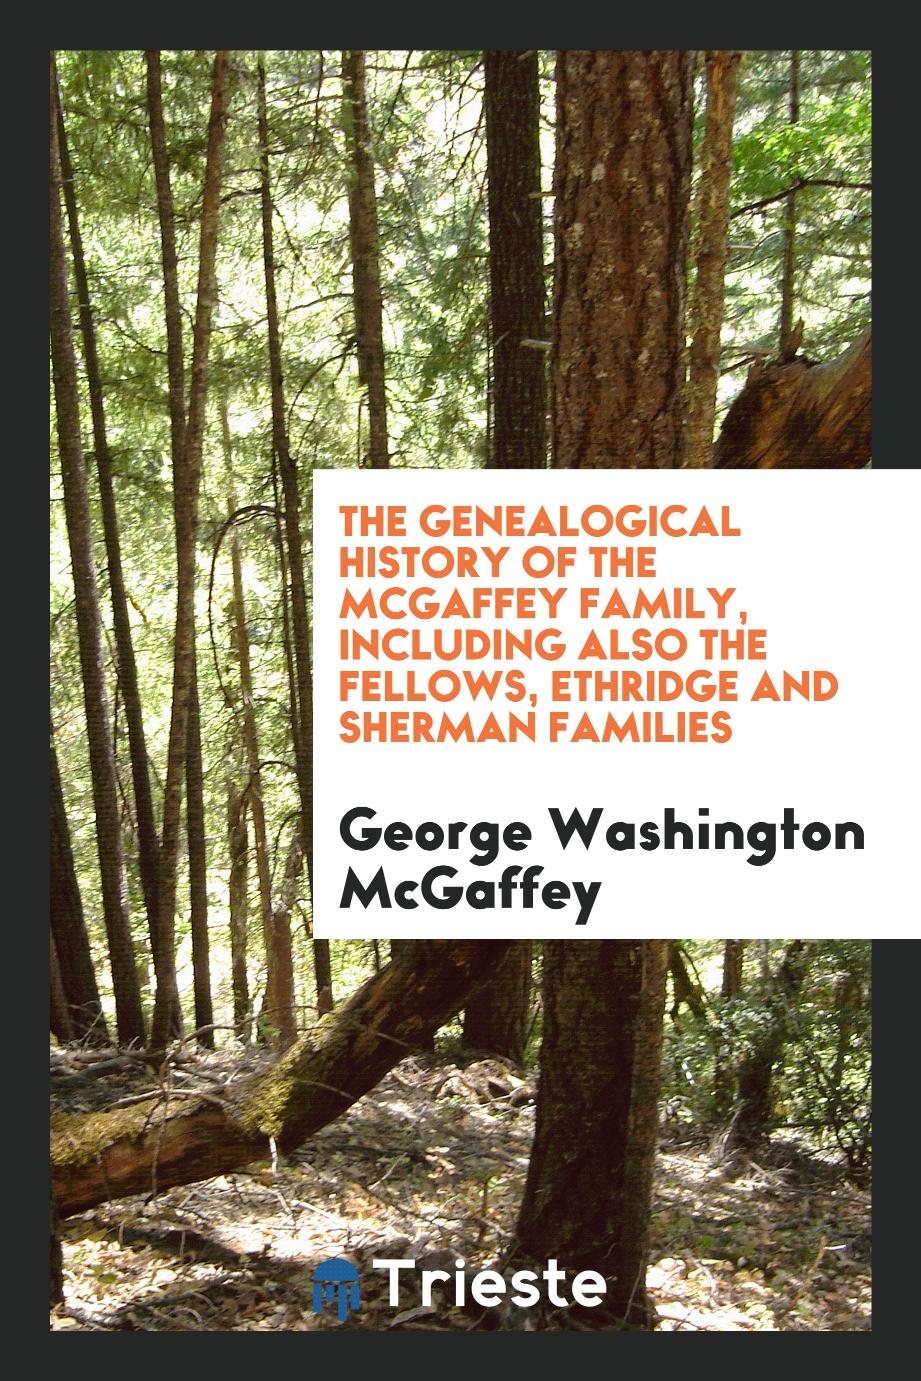 The Genealogical History of the McGaffey Family, Including Also the Fellows, Ethridge and Sherman Families